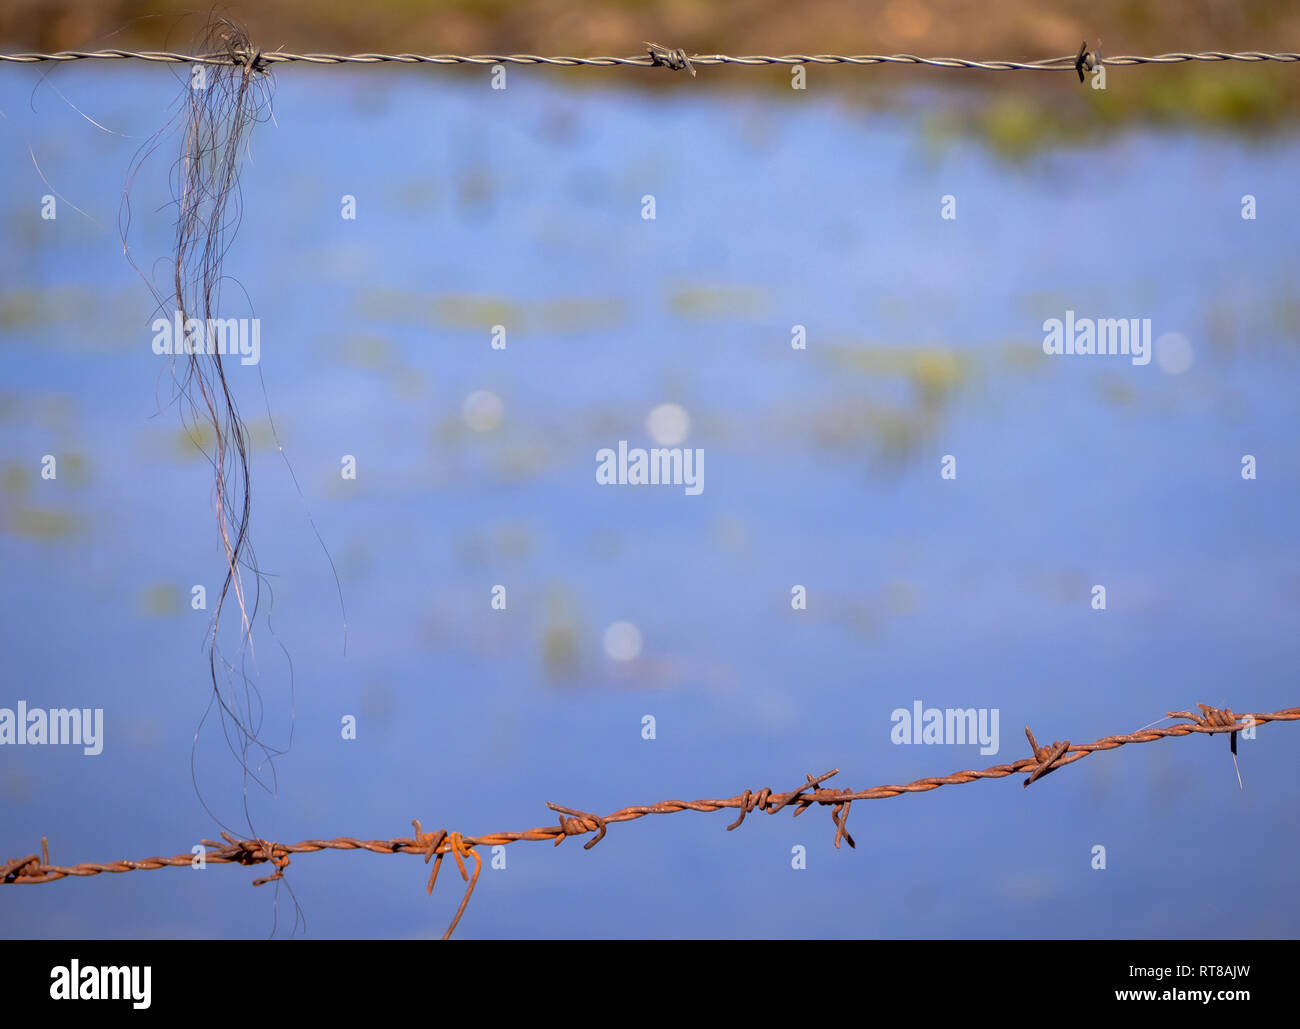 Abstract background. Animal hair on a rusty barbed wire Stock Photo